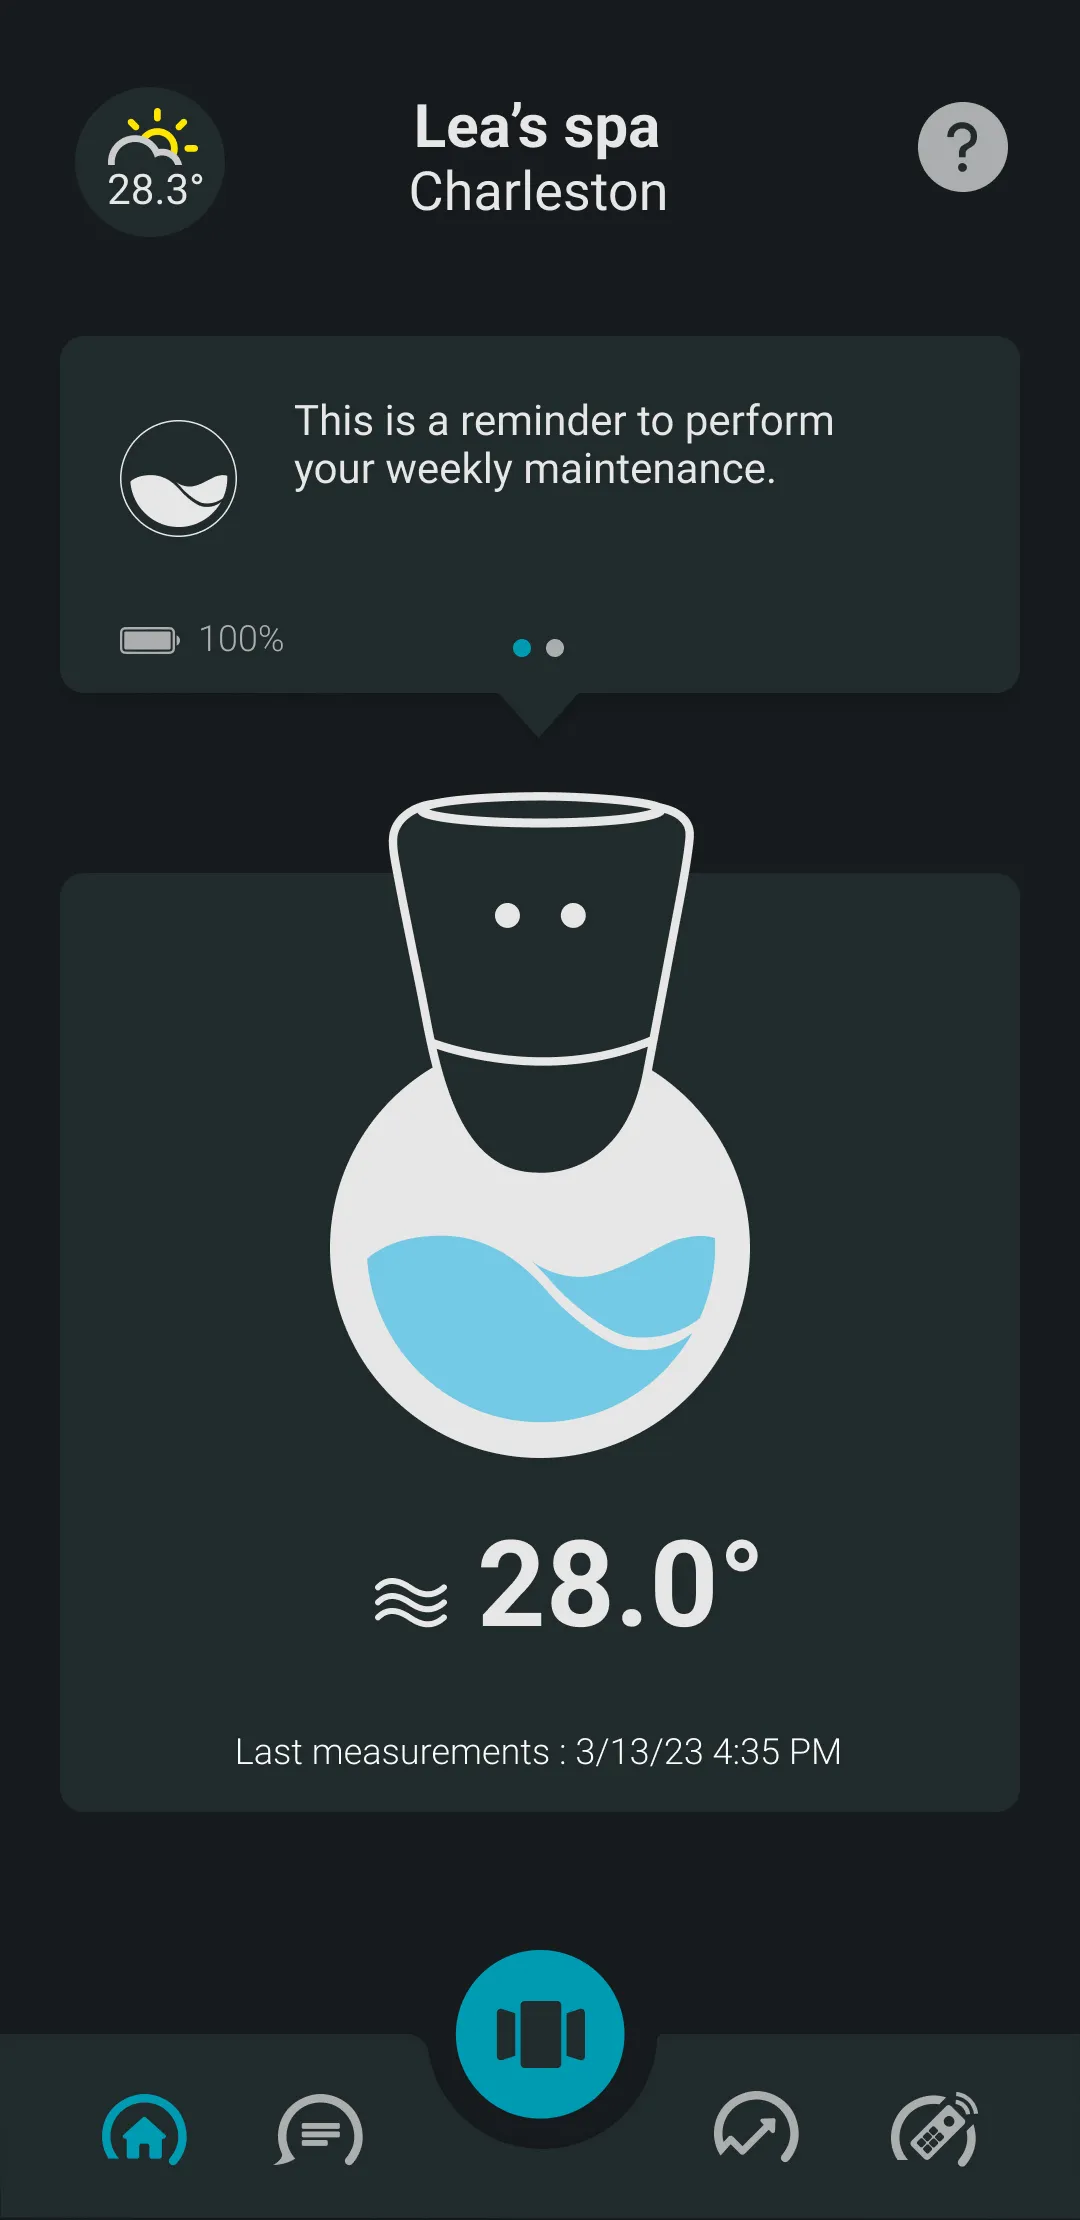 ICO application screen: recommendation to the user to perform weekly hot tub maintenance